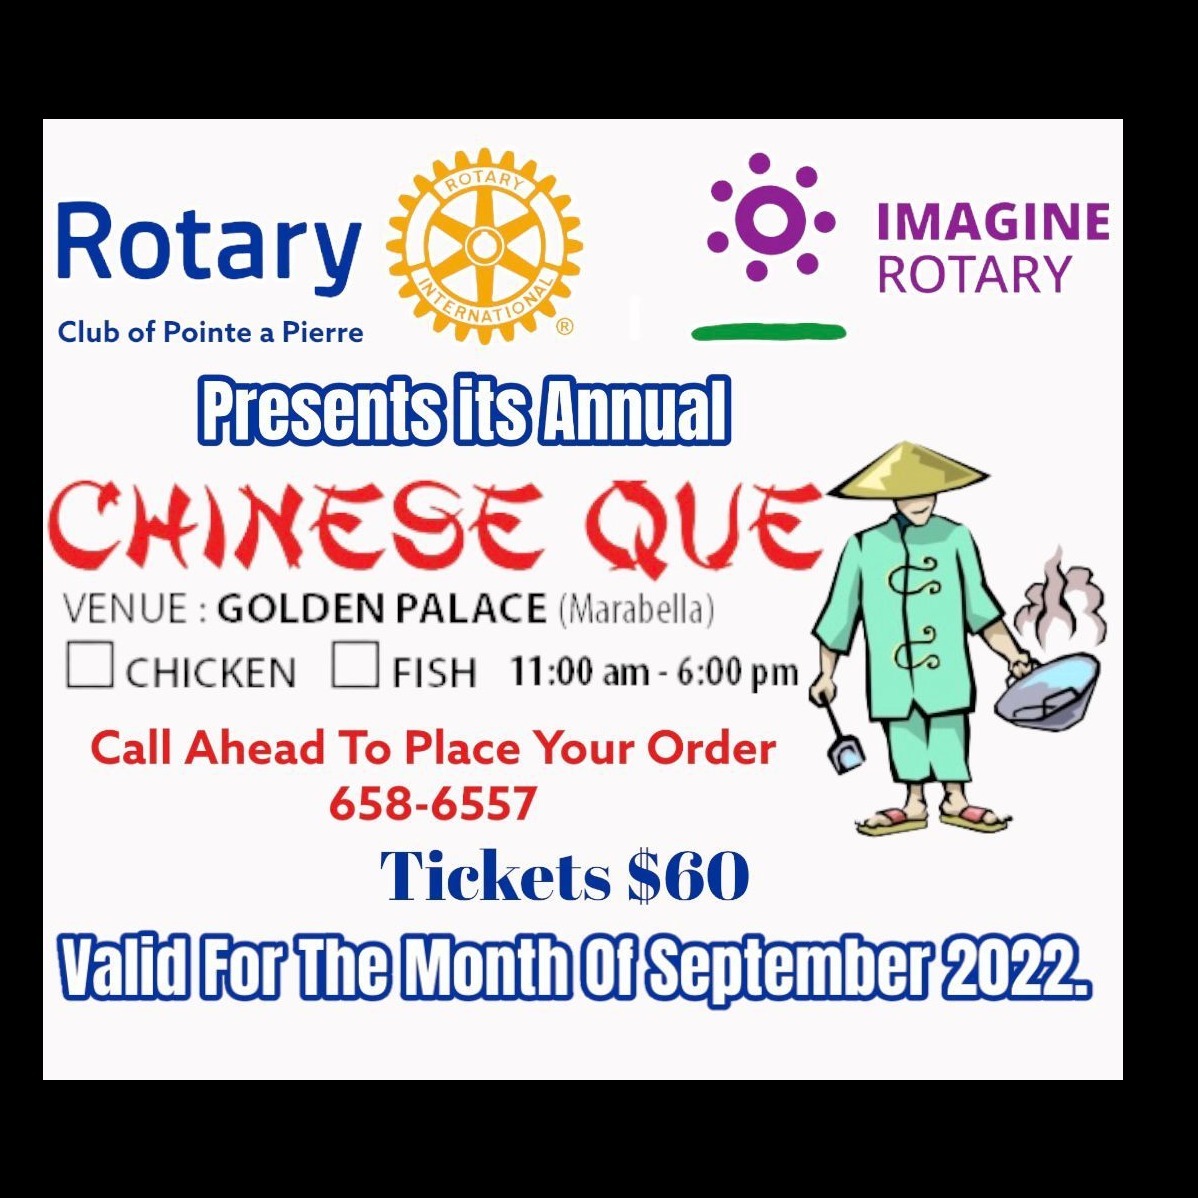 Rotary Club Of Pointe a Pierre Chinese Que